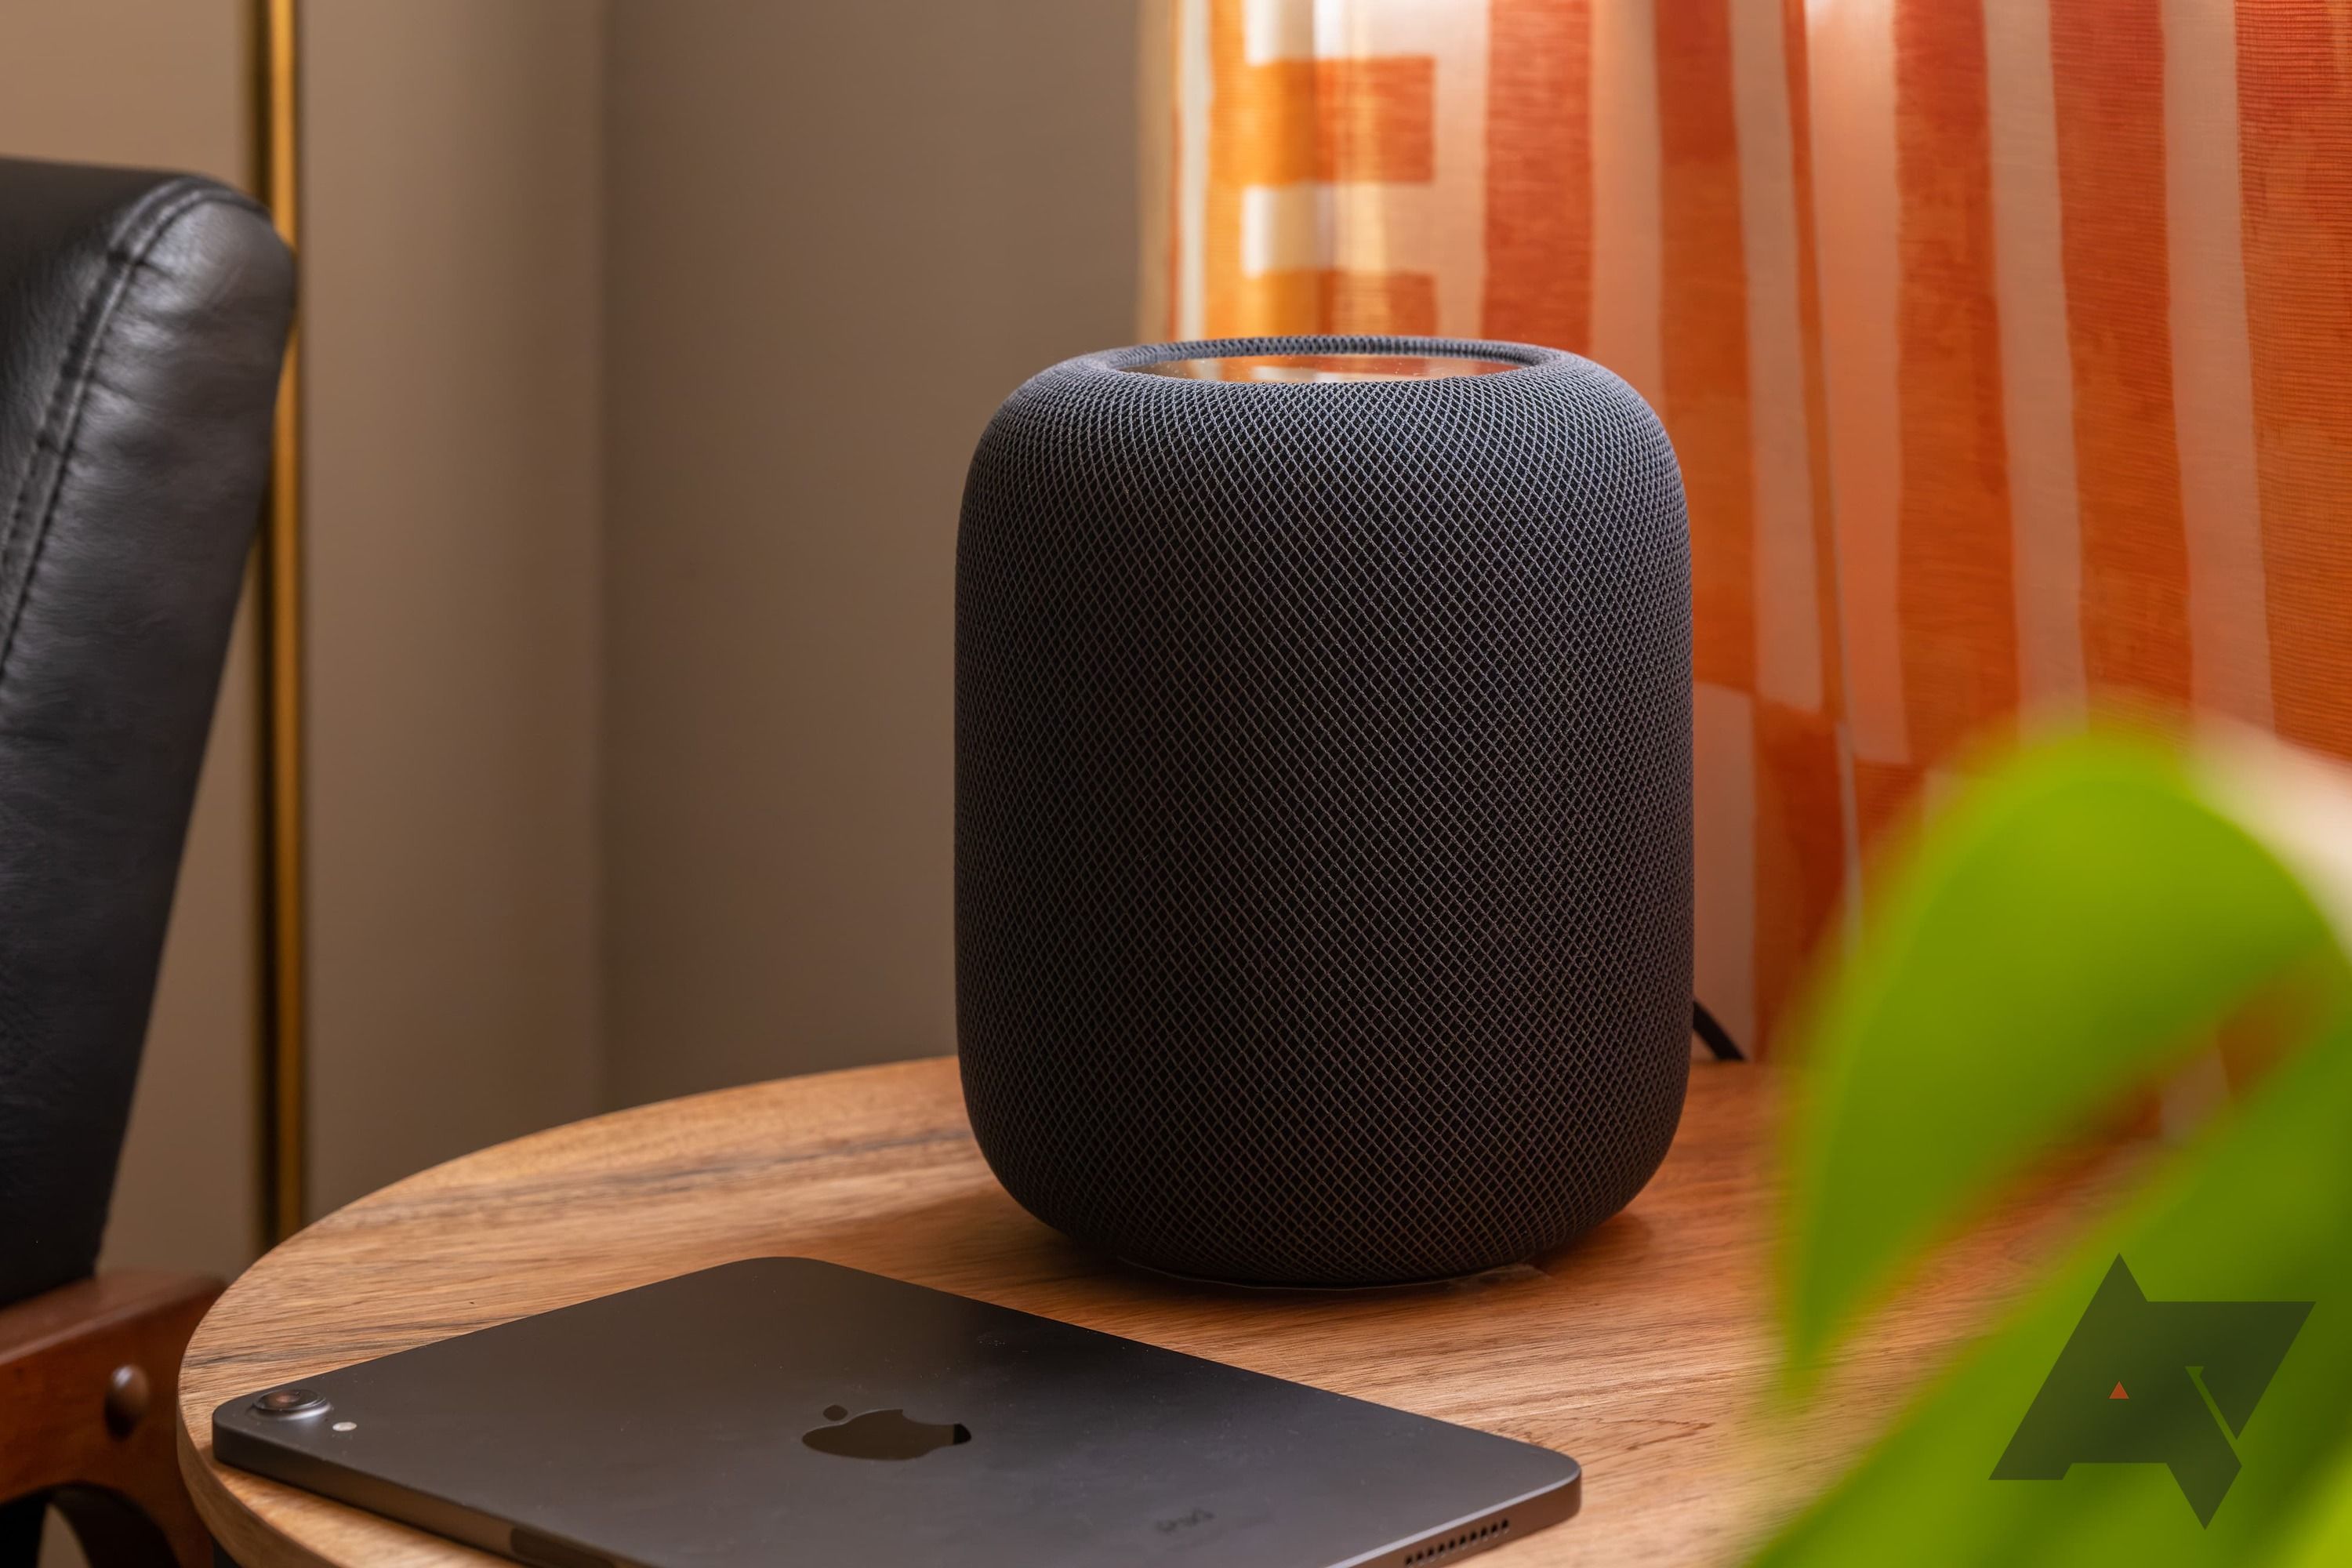 limitations gen) (2nd speaker frustrating Apple with review: great HomePod A